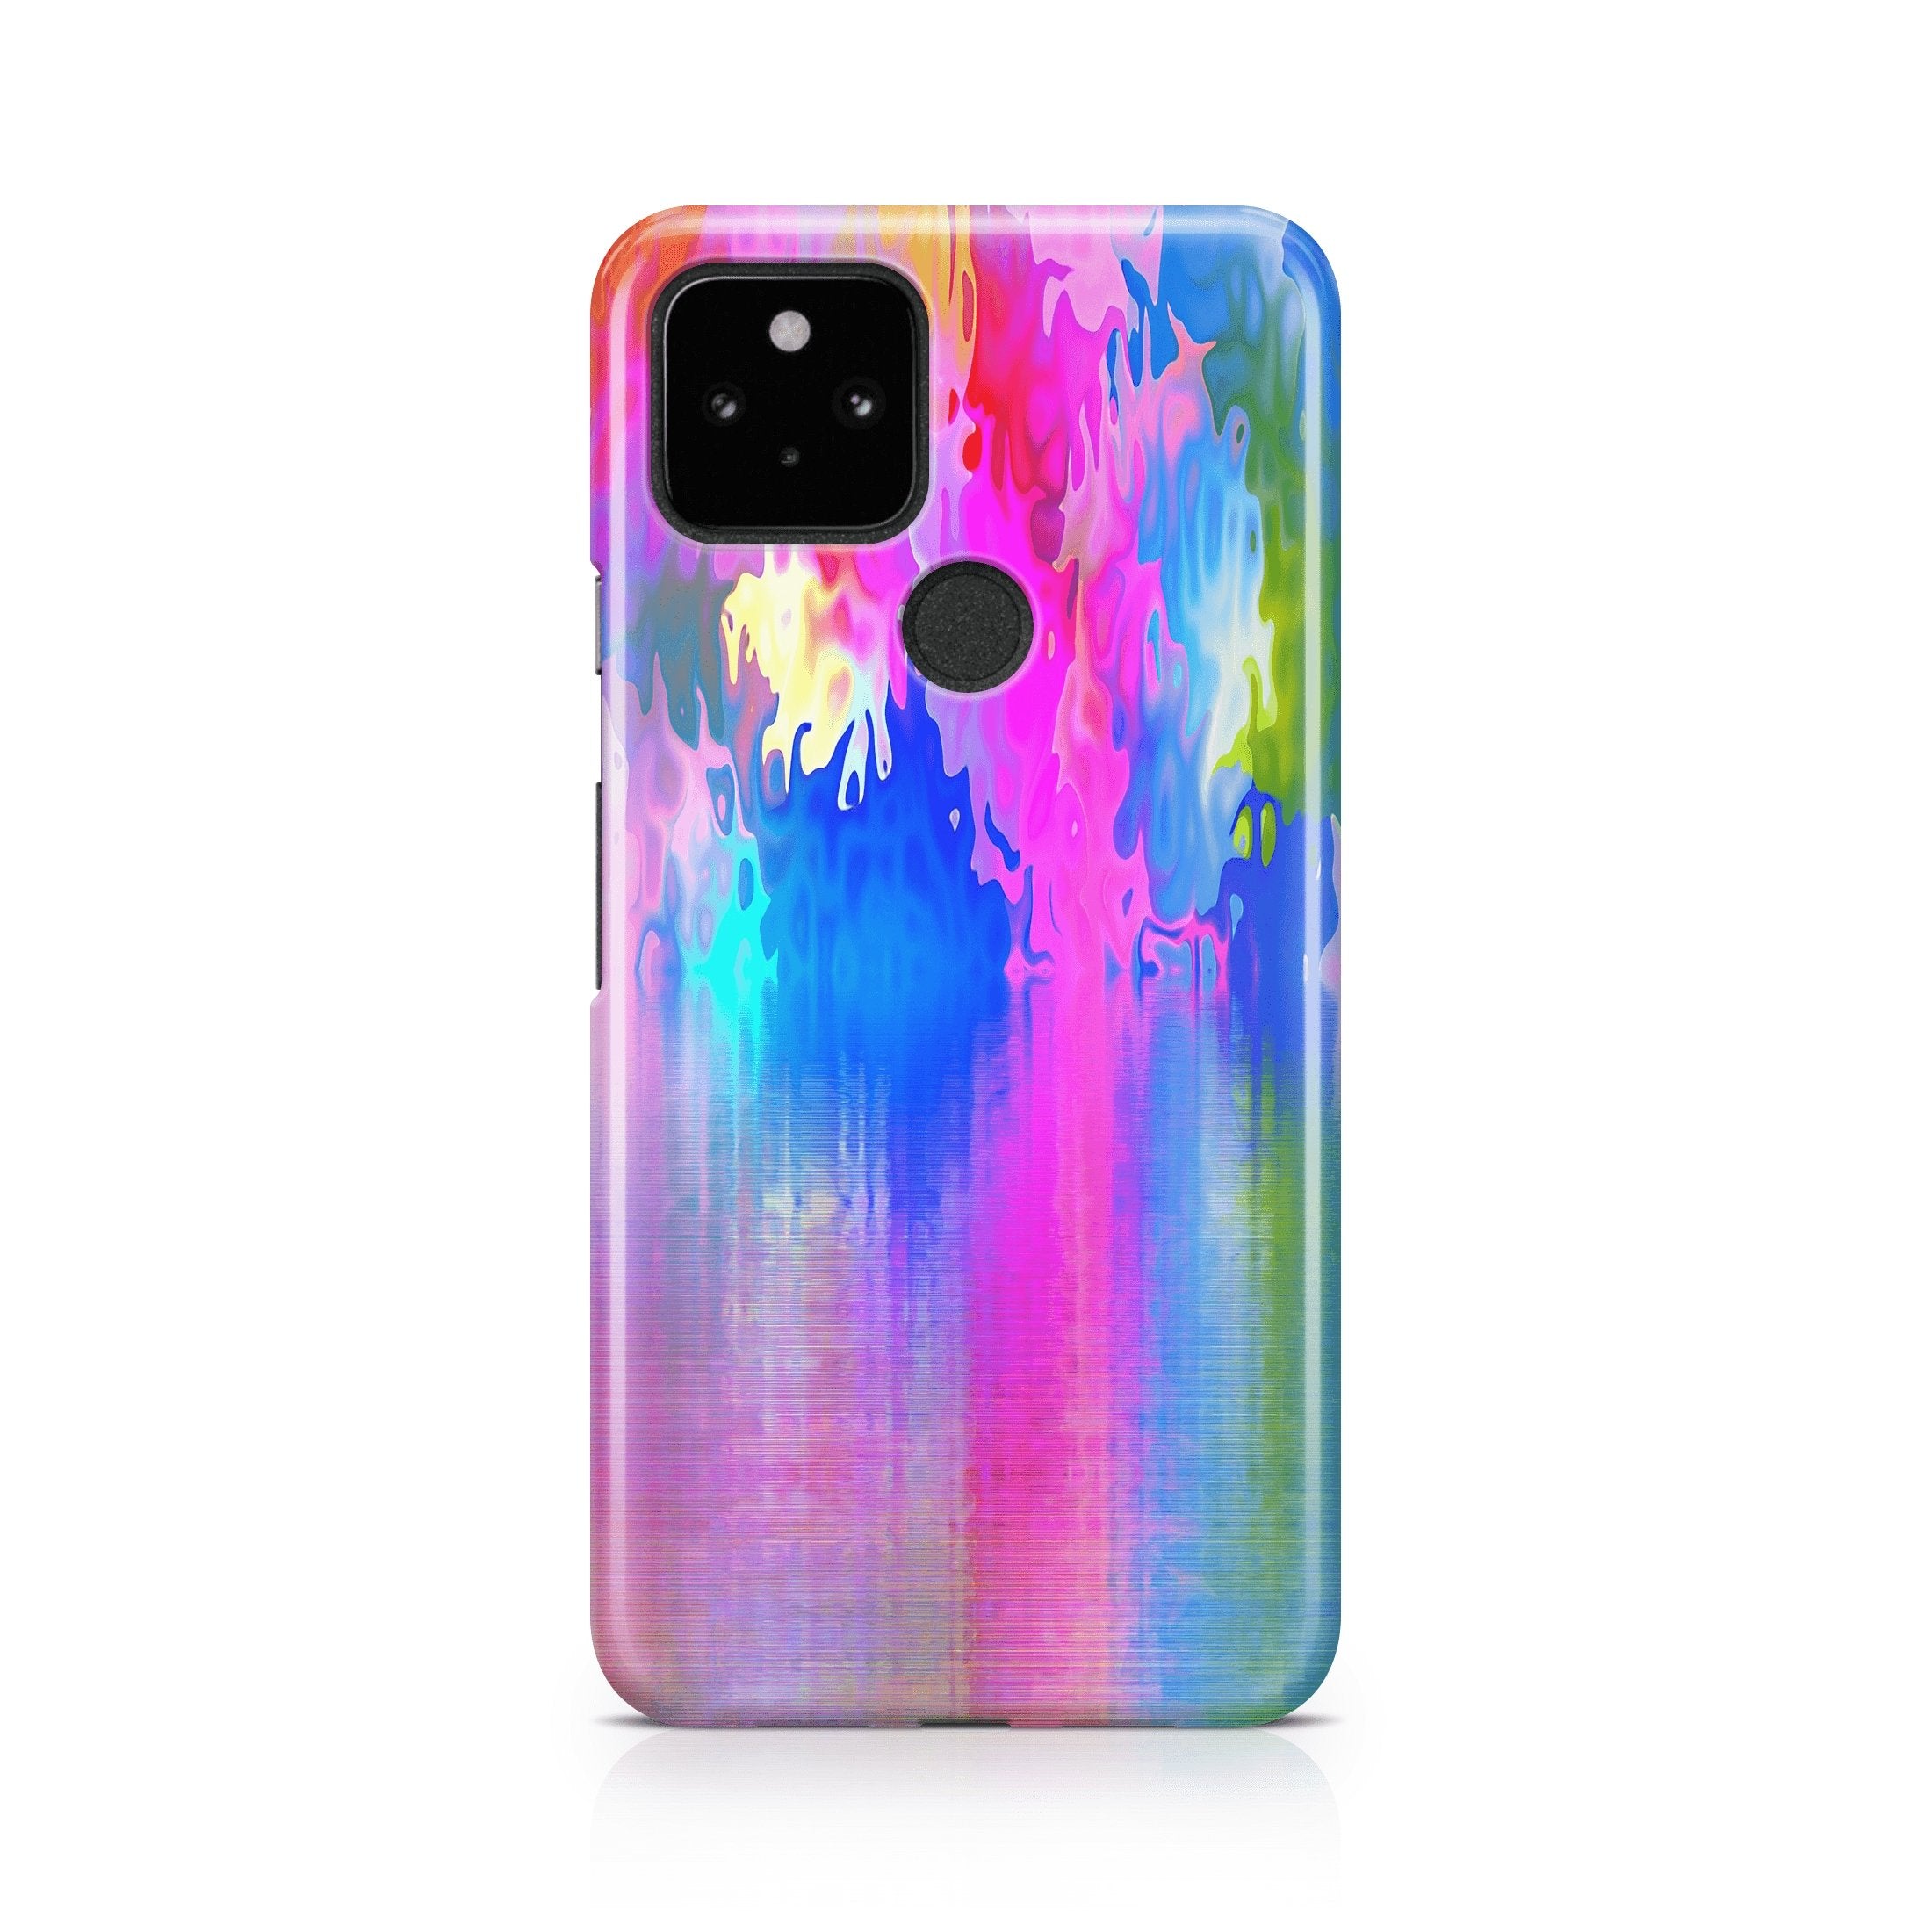 ColorCloud - Google phone case designs by CaseSwagger